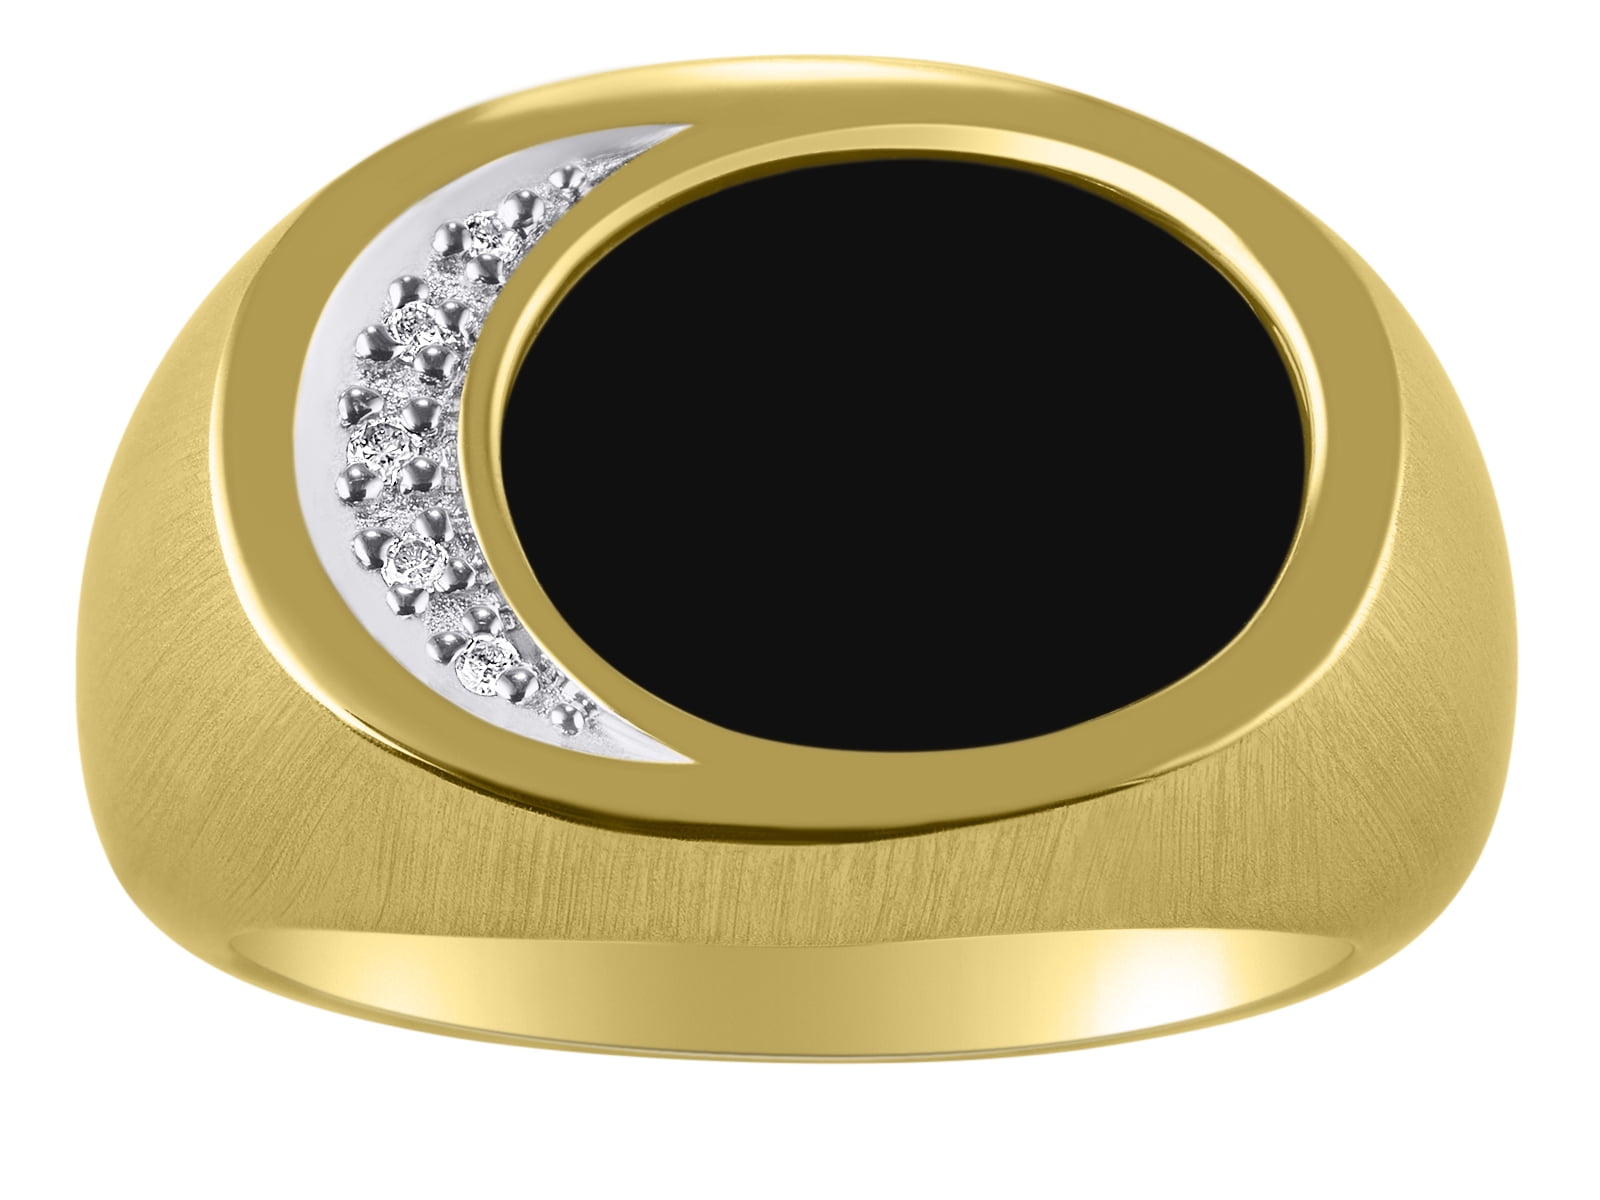 RYLOS Mens Rings 14K Yellow Gold Designer Ring With Diamonds and Black Onyx  Rings For Men Men's Rings Gold Rings Sizes 8,9,10,11,12,13 Mens Jewelry